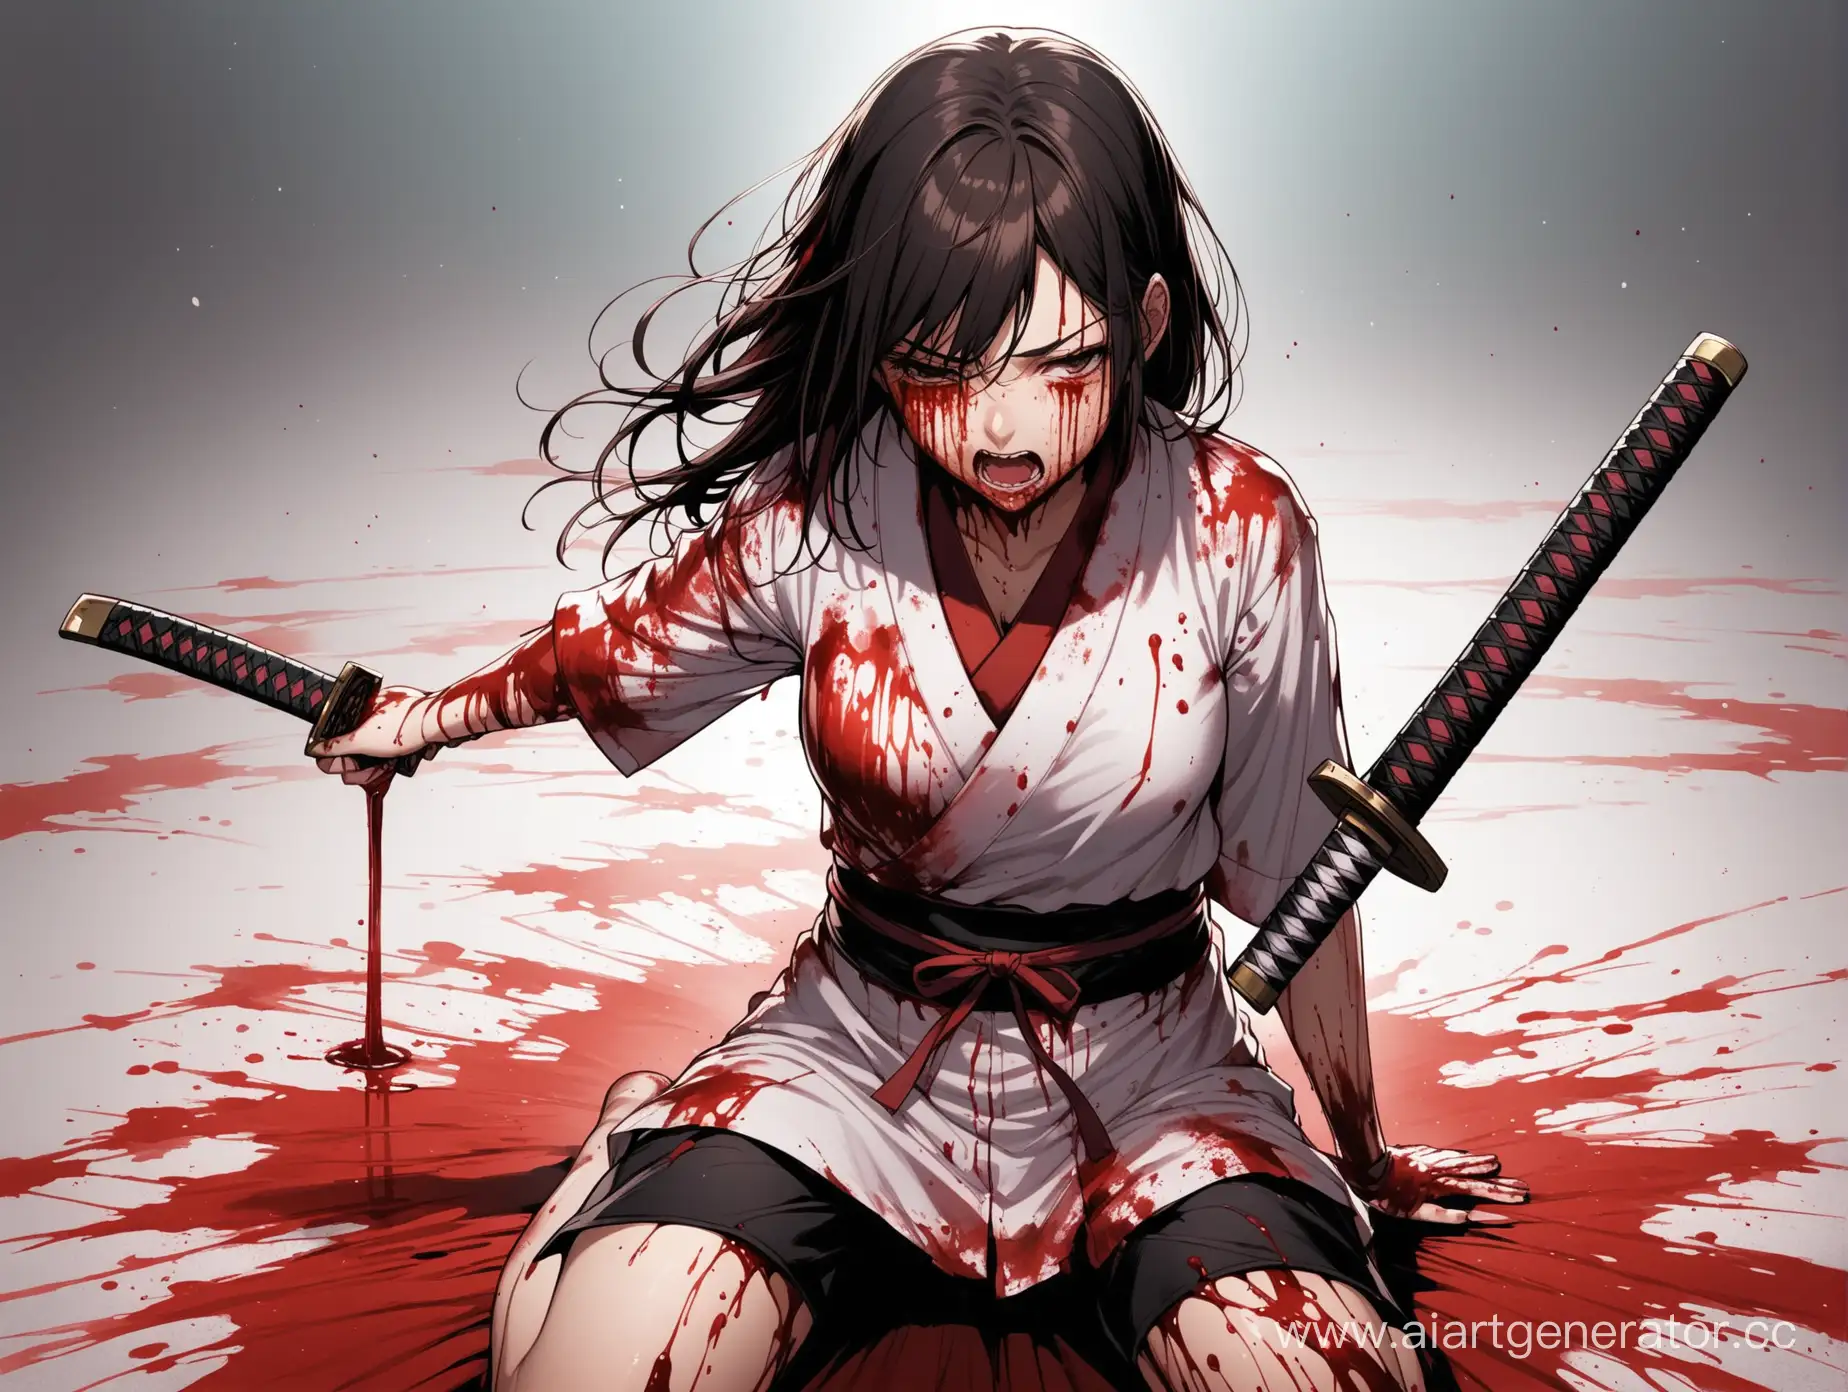 The girl is covered in blood after a fight with a katana